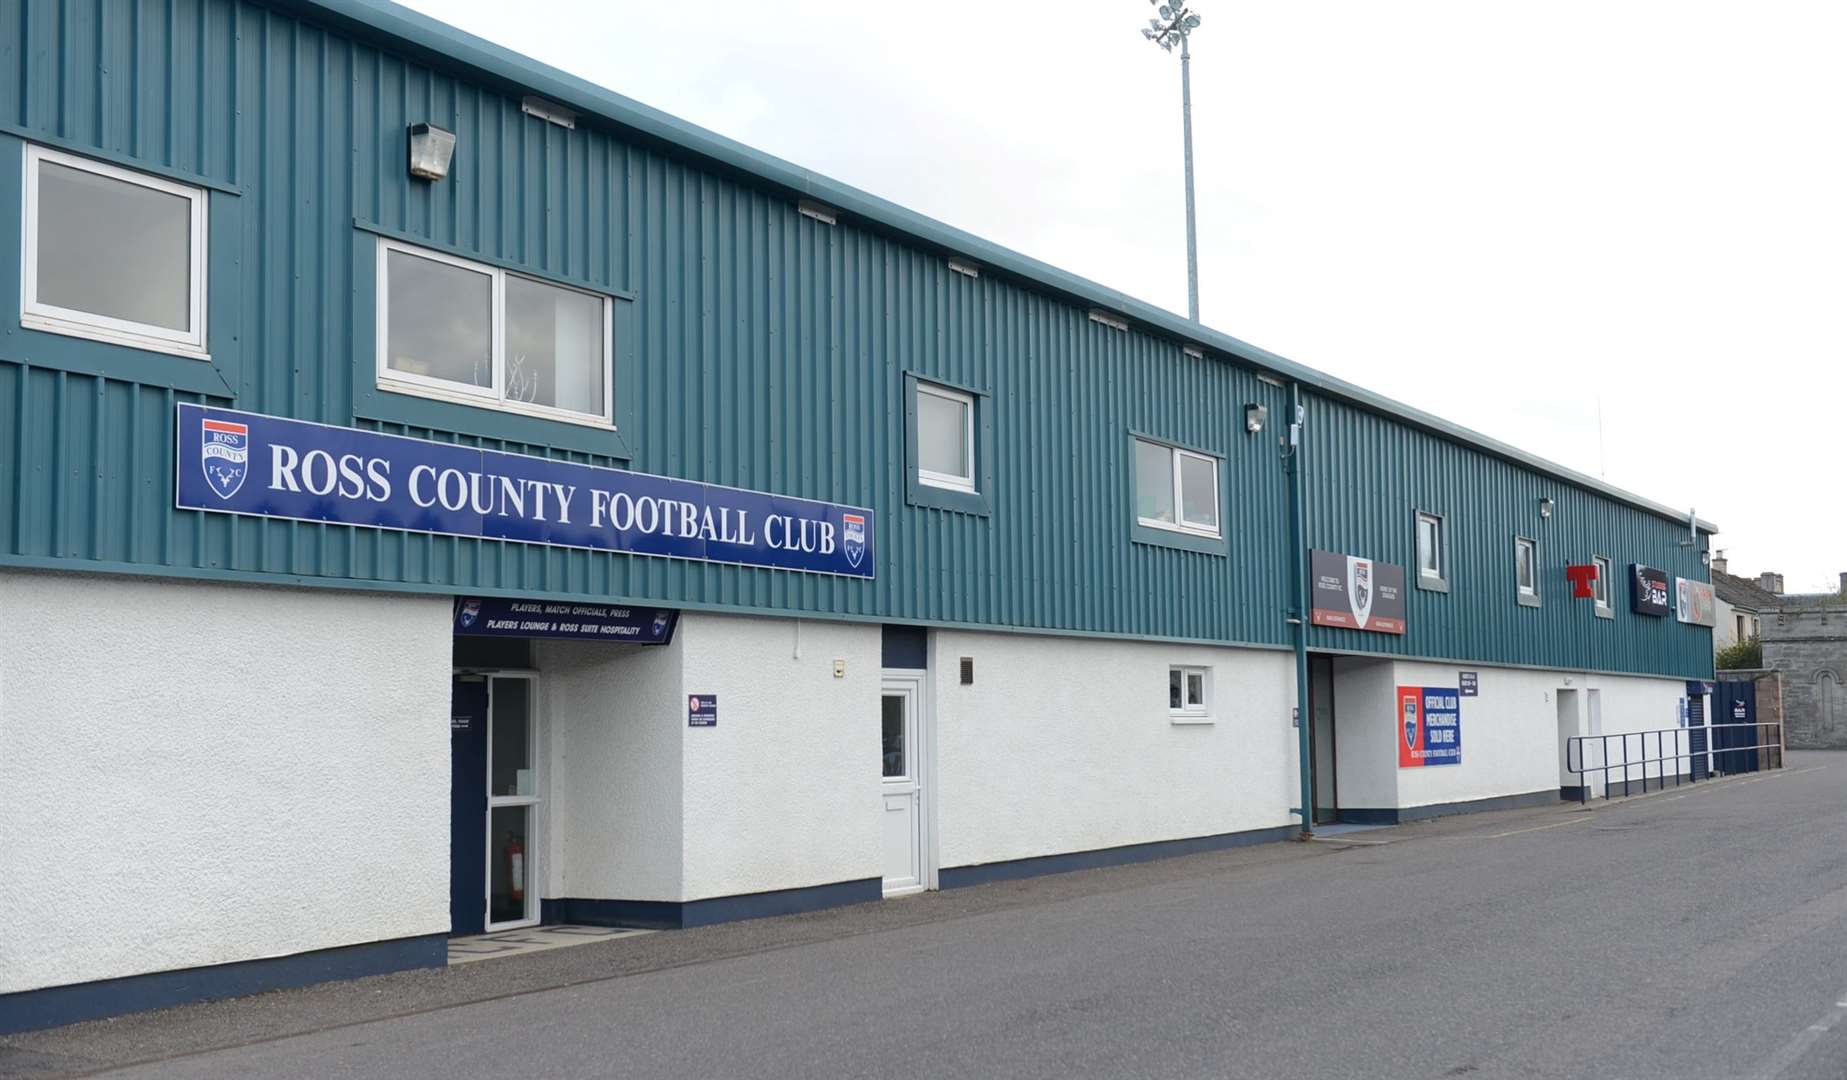 Ross County have written off a loss of £579,472 for the financial year ending May 31, 2023.